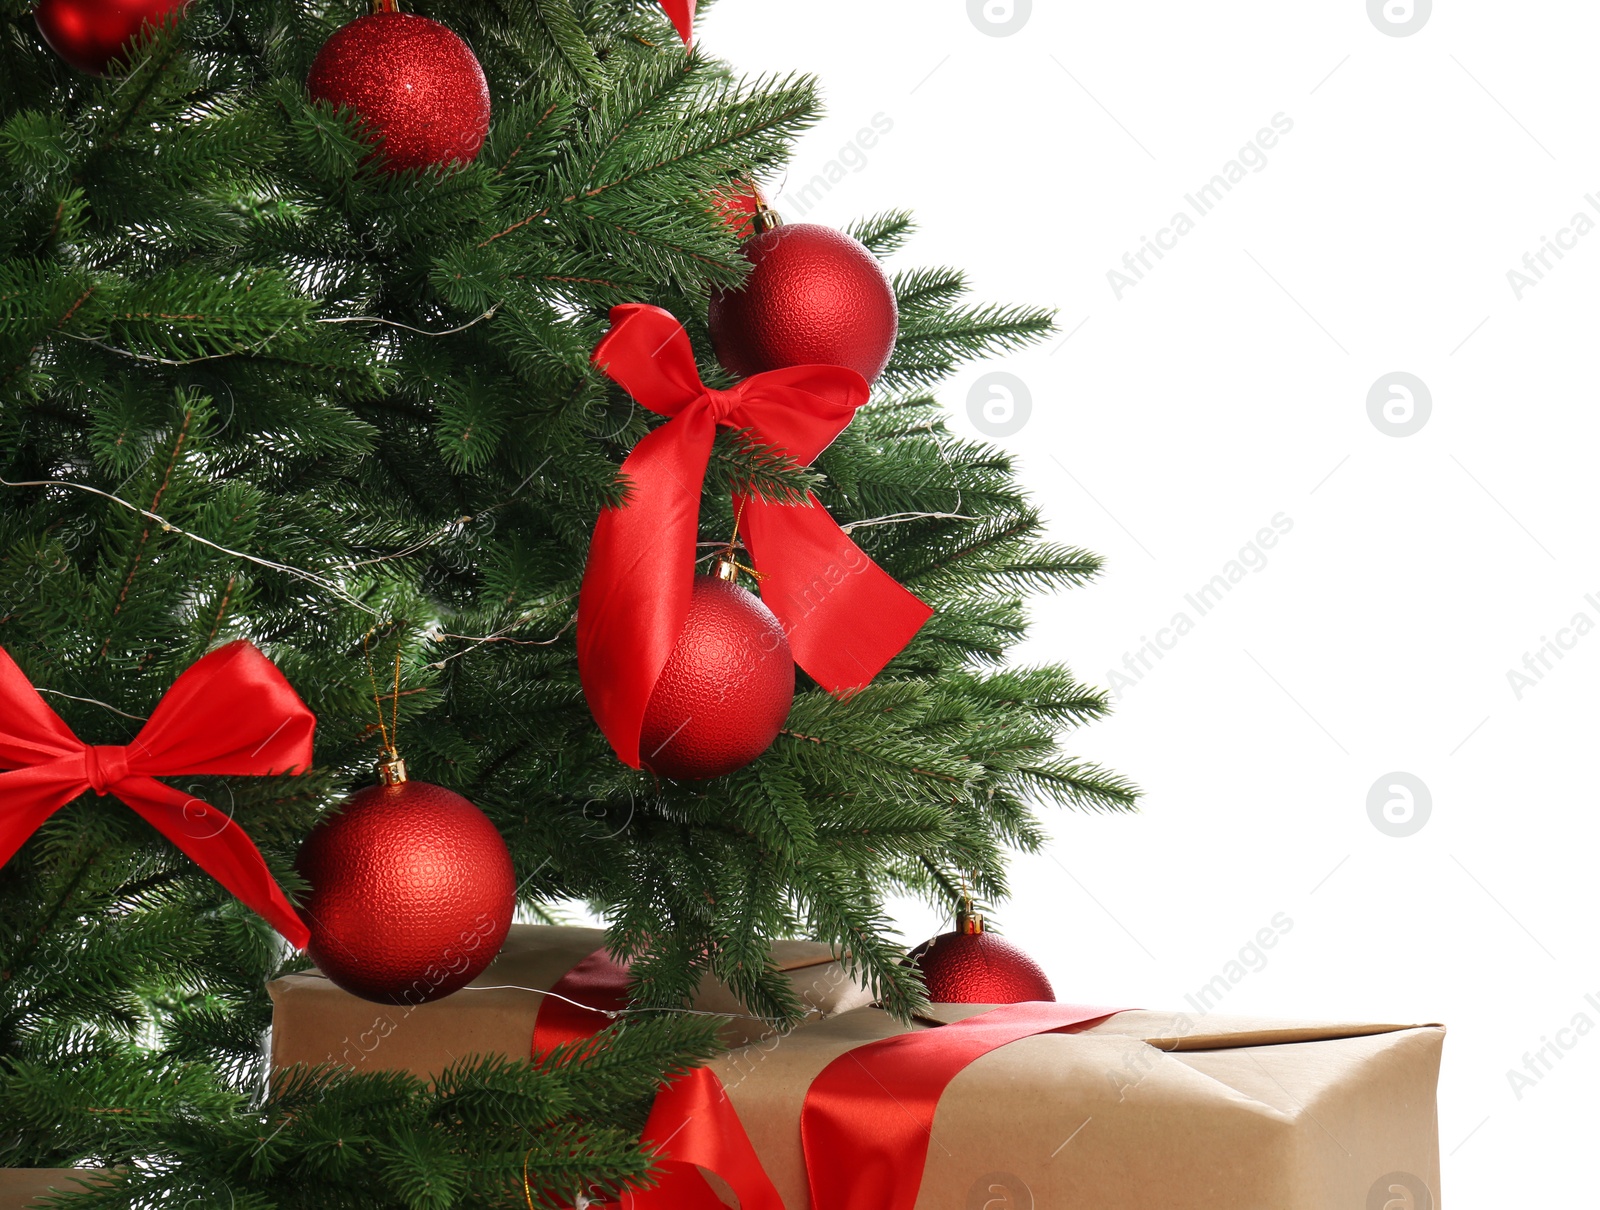 Image of Beautifully decorated Christmas tree and gifts on white background, closeup